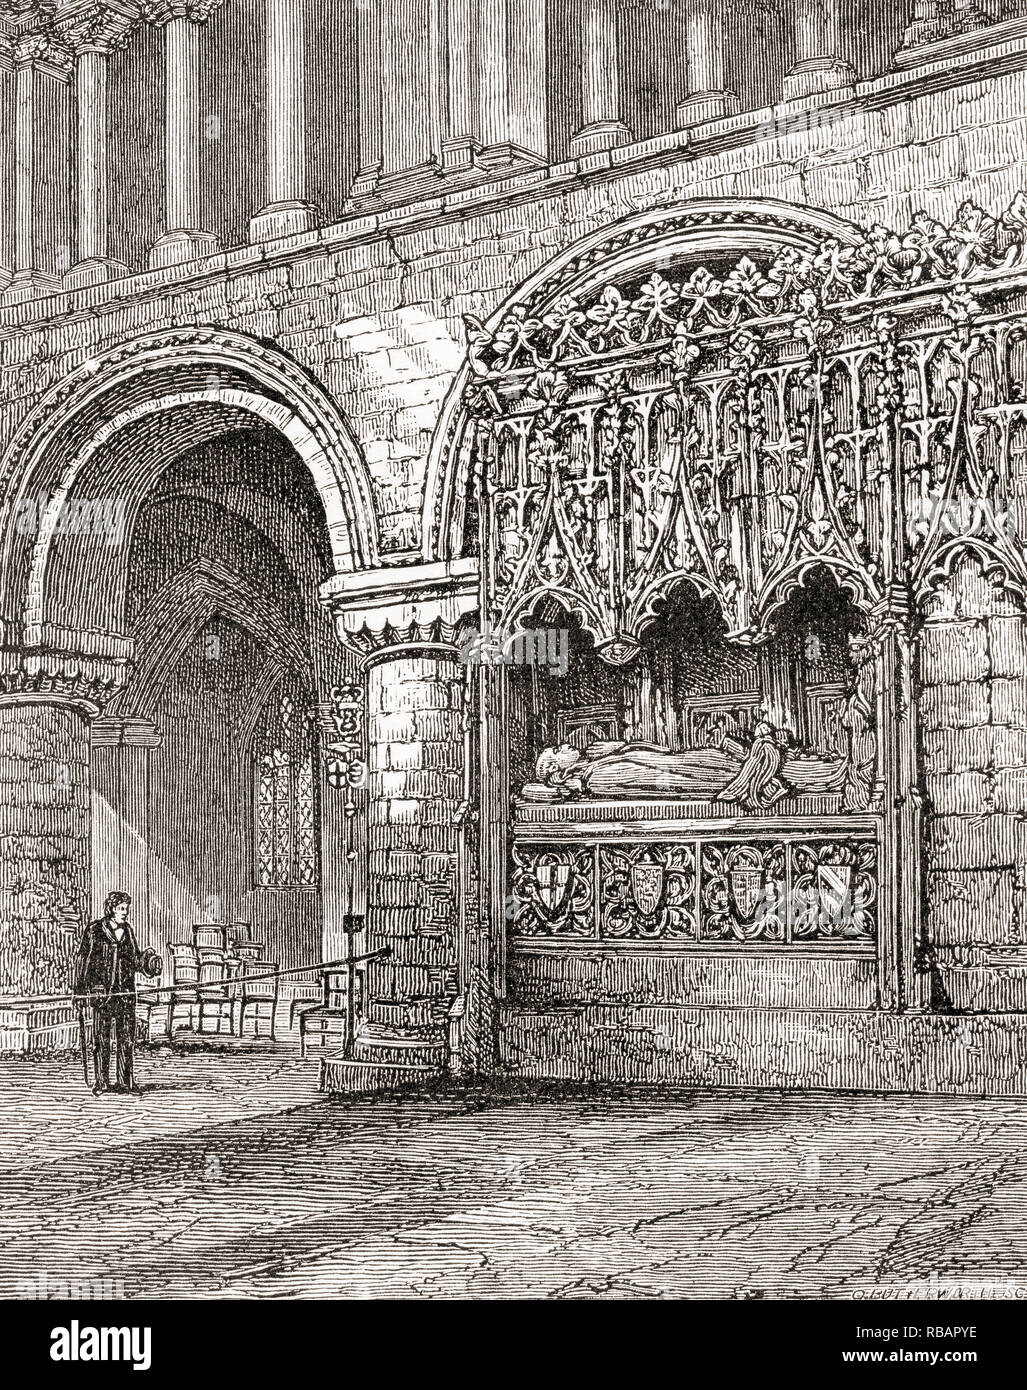 The tomb of Rahere aka Raher or Raherius, (Anglo-Norman priest and monk), The Priory Church of St Bartholomew the Great, aka Great St Bart's, West Smithfield, London, England, seen here in the 19th century. From London Pictures, published 1890 Stock Photo